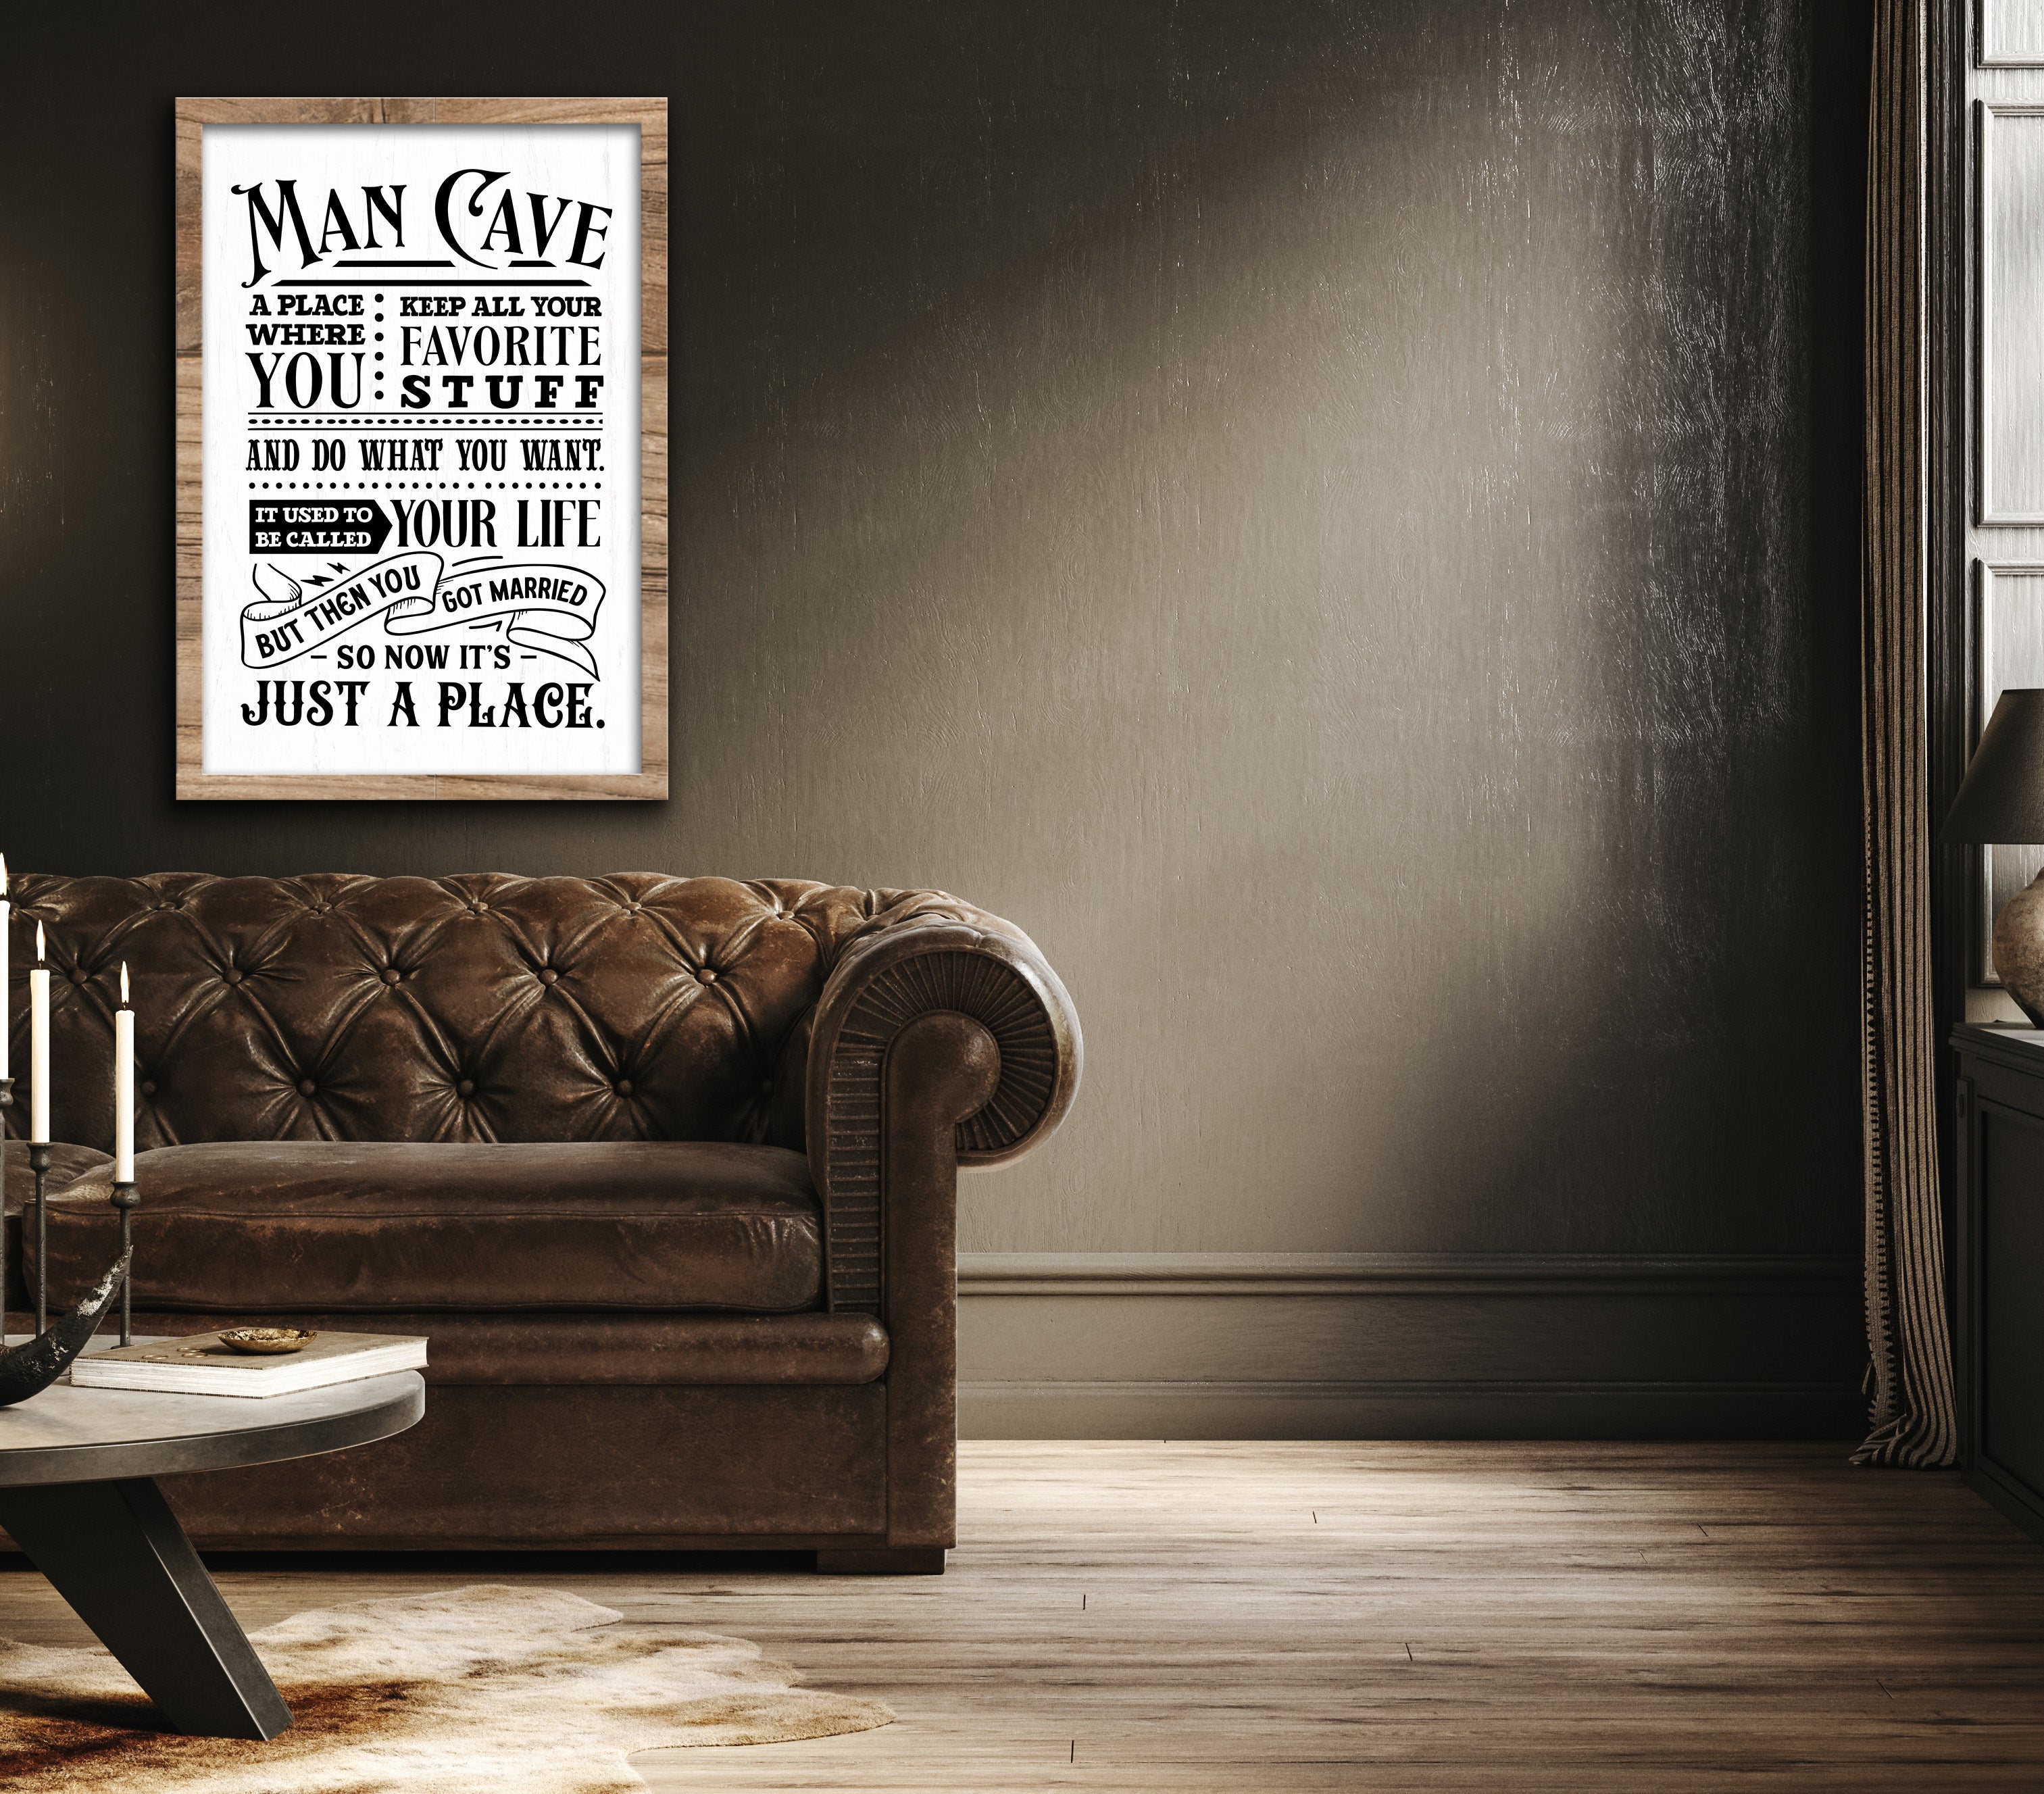 WELCOME TO THE MAN CAVE